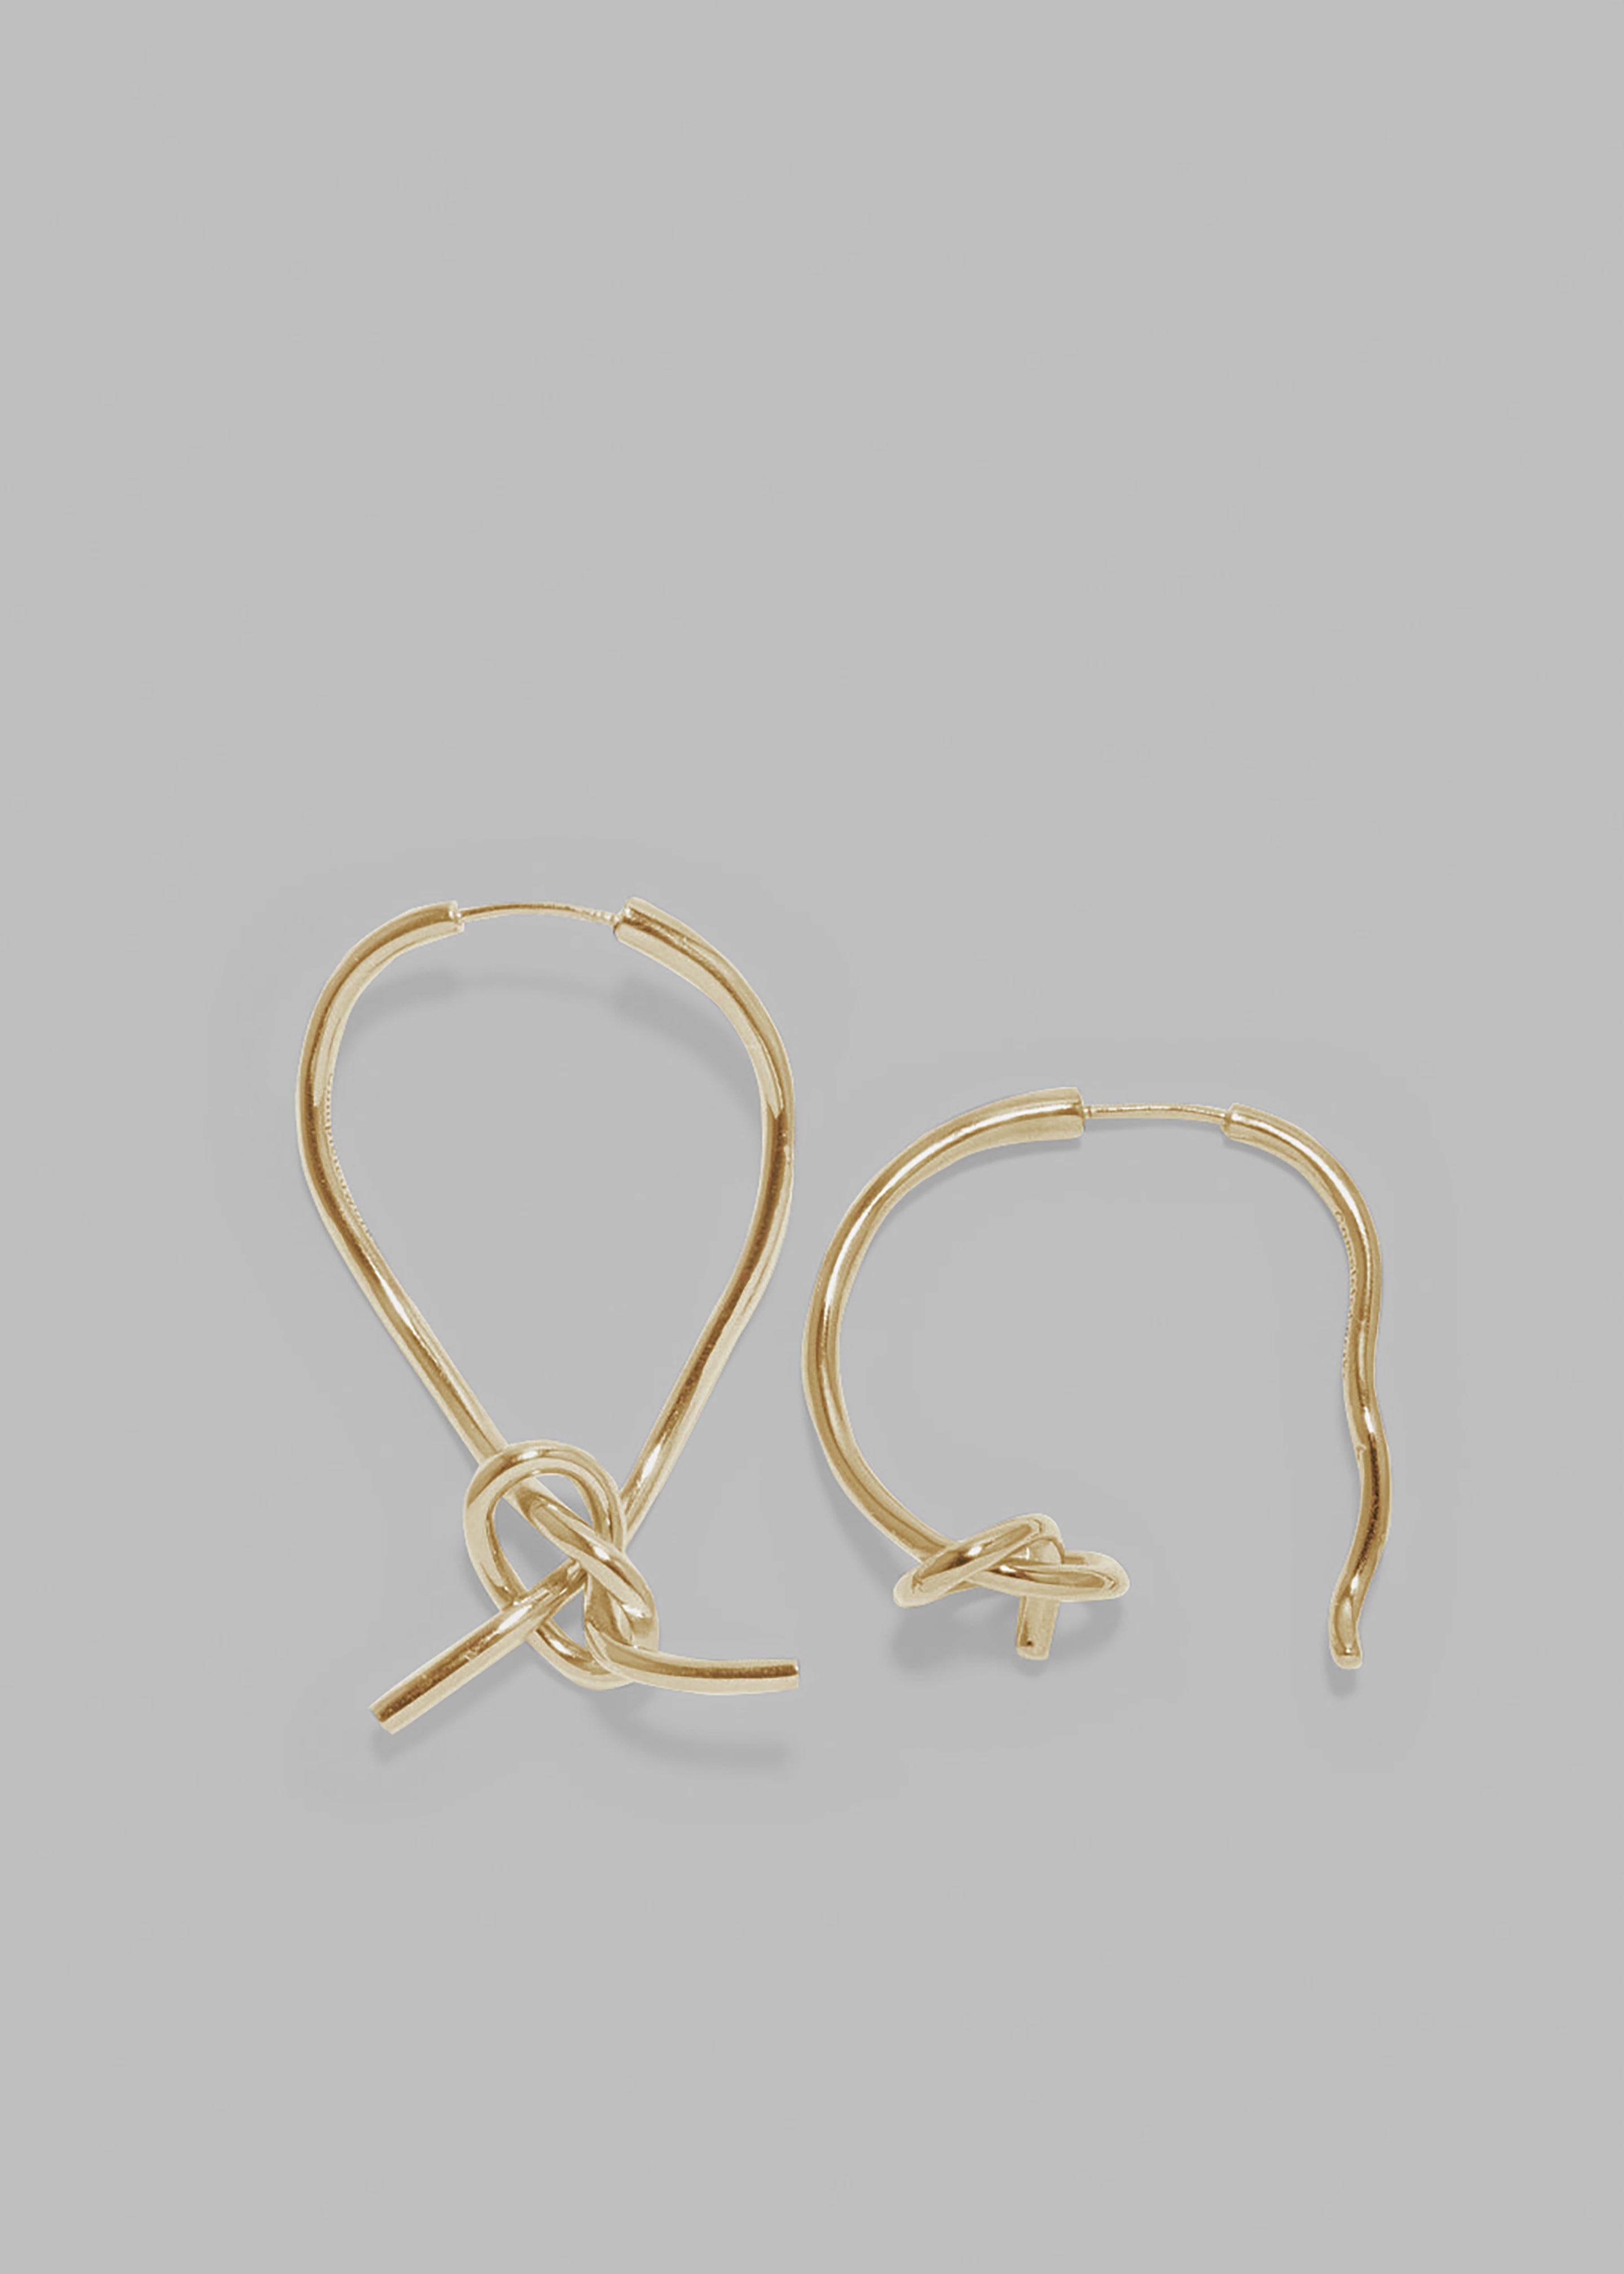 Completedworks V031 Vermeil Earrings - Recycled Silver - 1